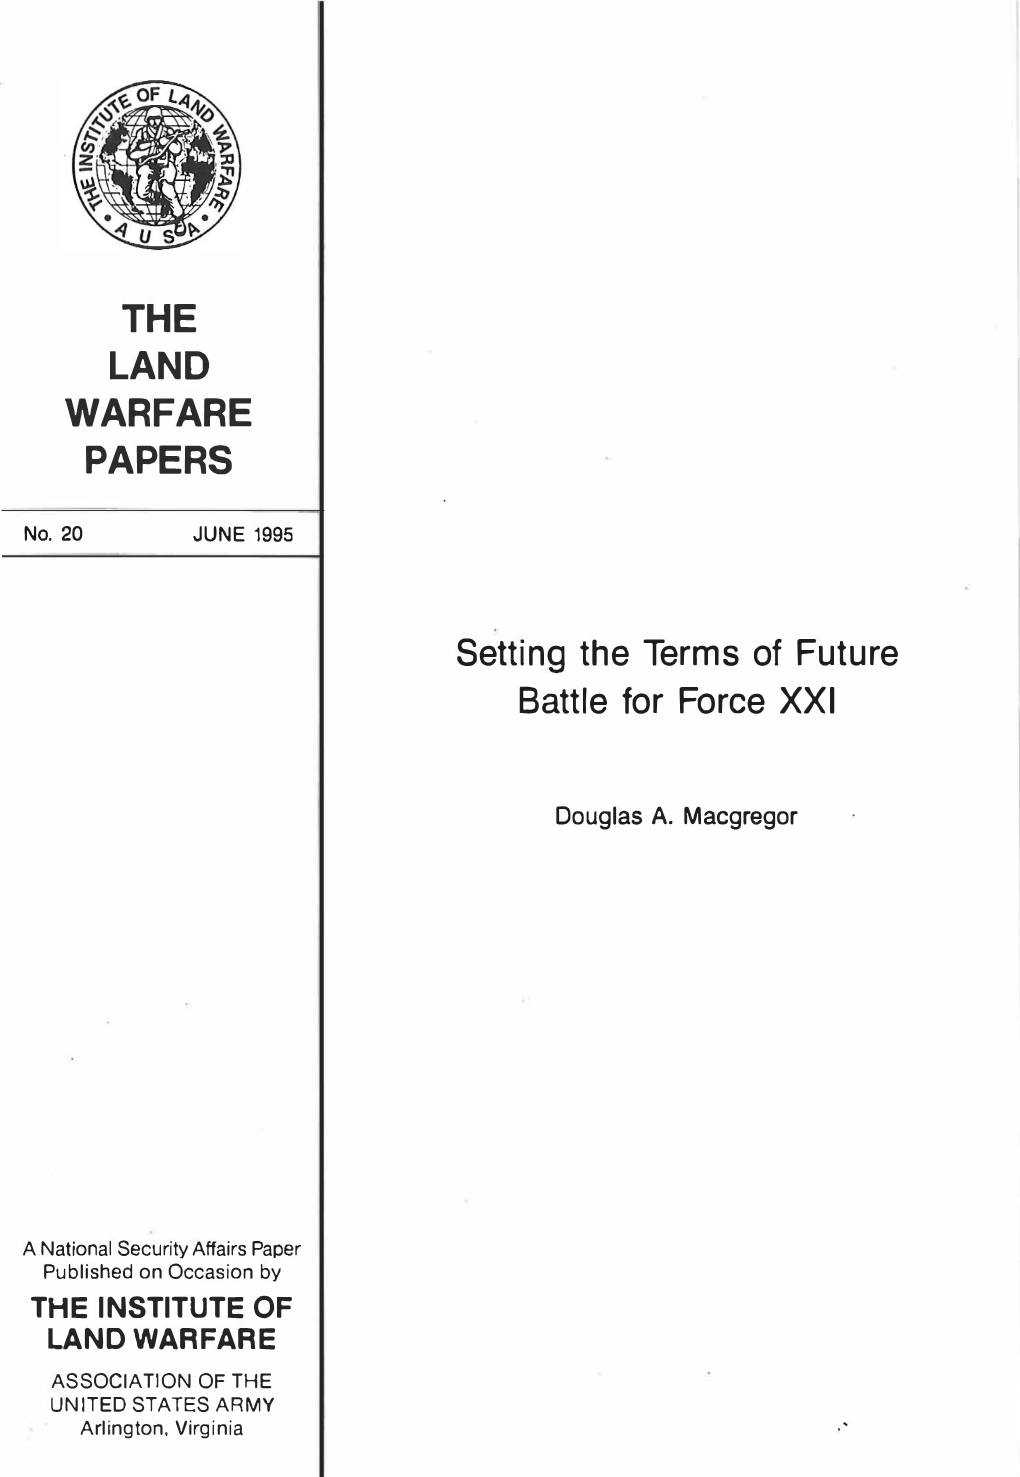 THE LAND WARFARE PAPERS Setting the Terms of Future Battle